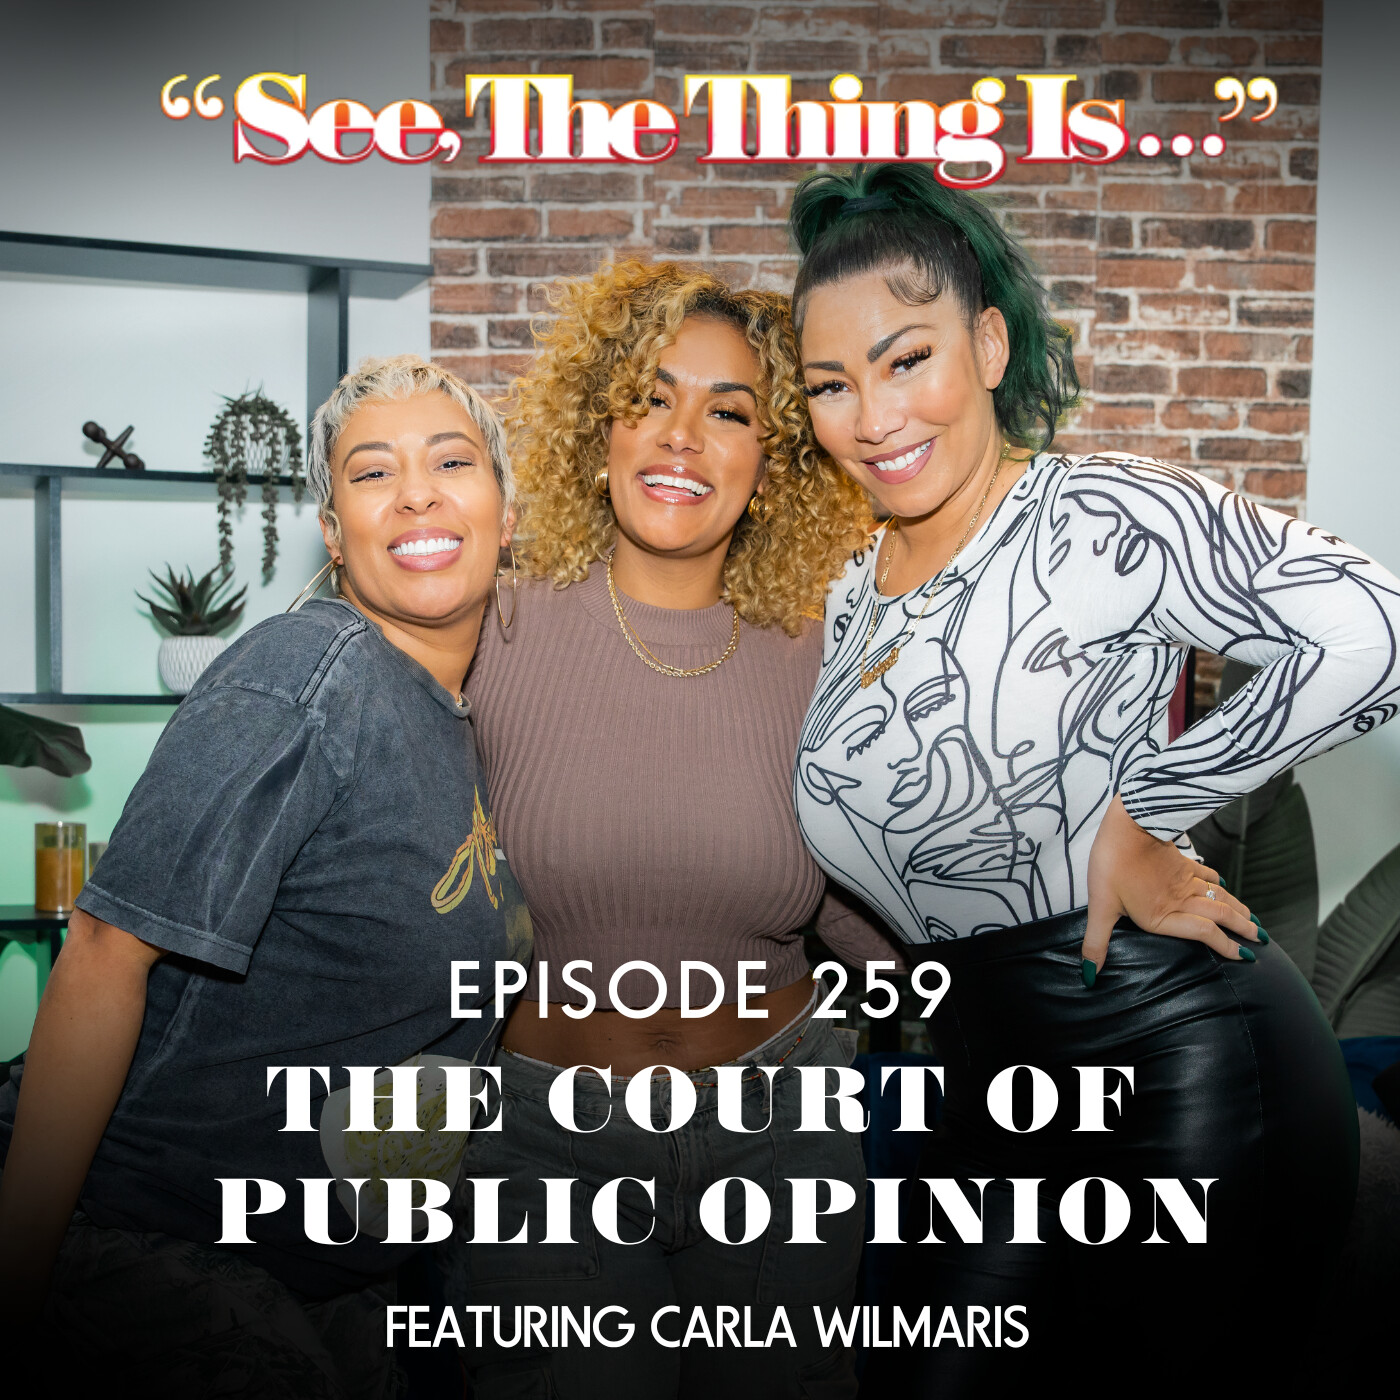 The Court of Public Opinion Feat. Carla Wilmaris